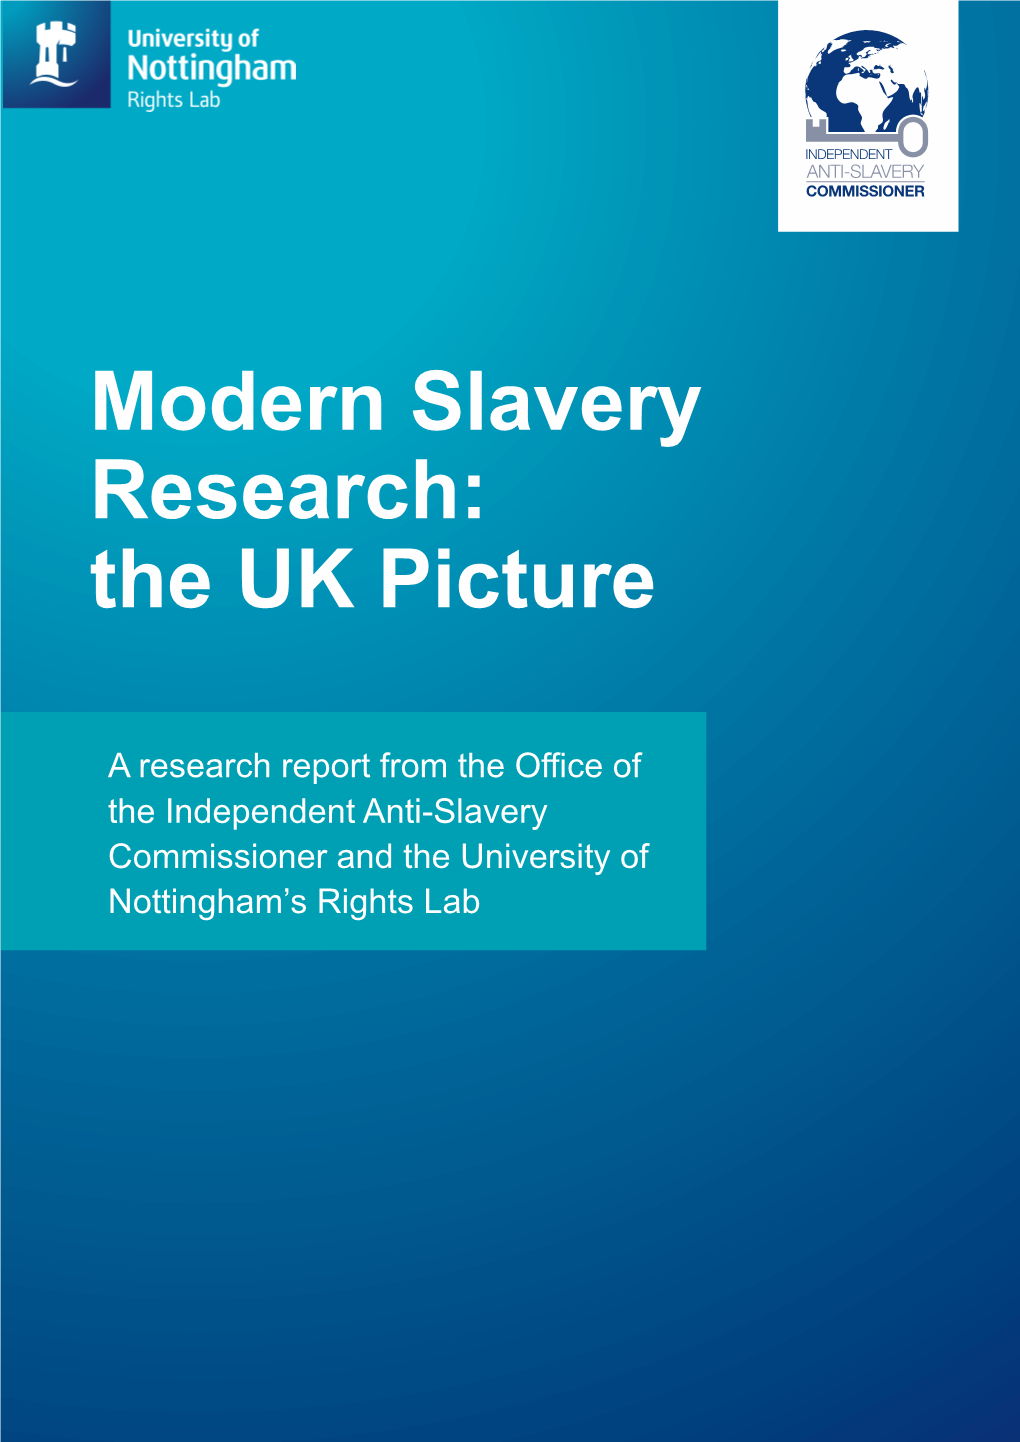 Modern Slavery Research: the UK Picture